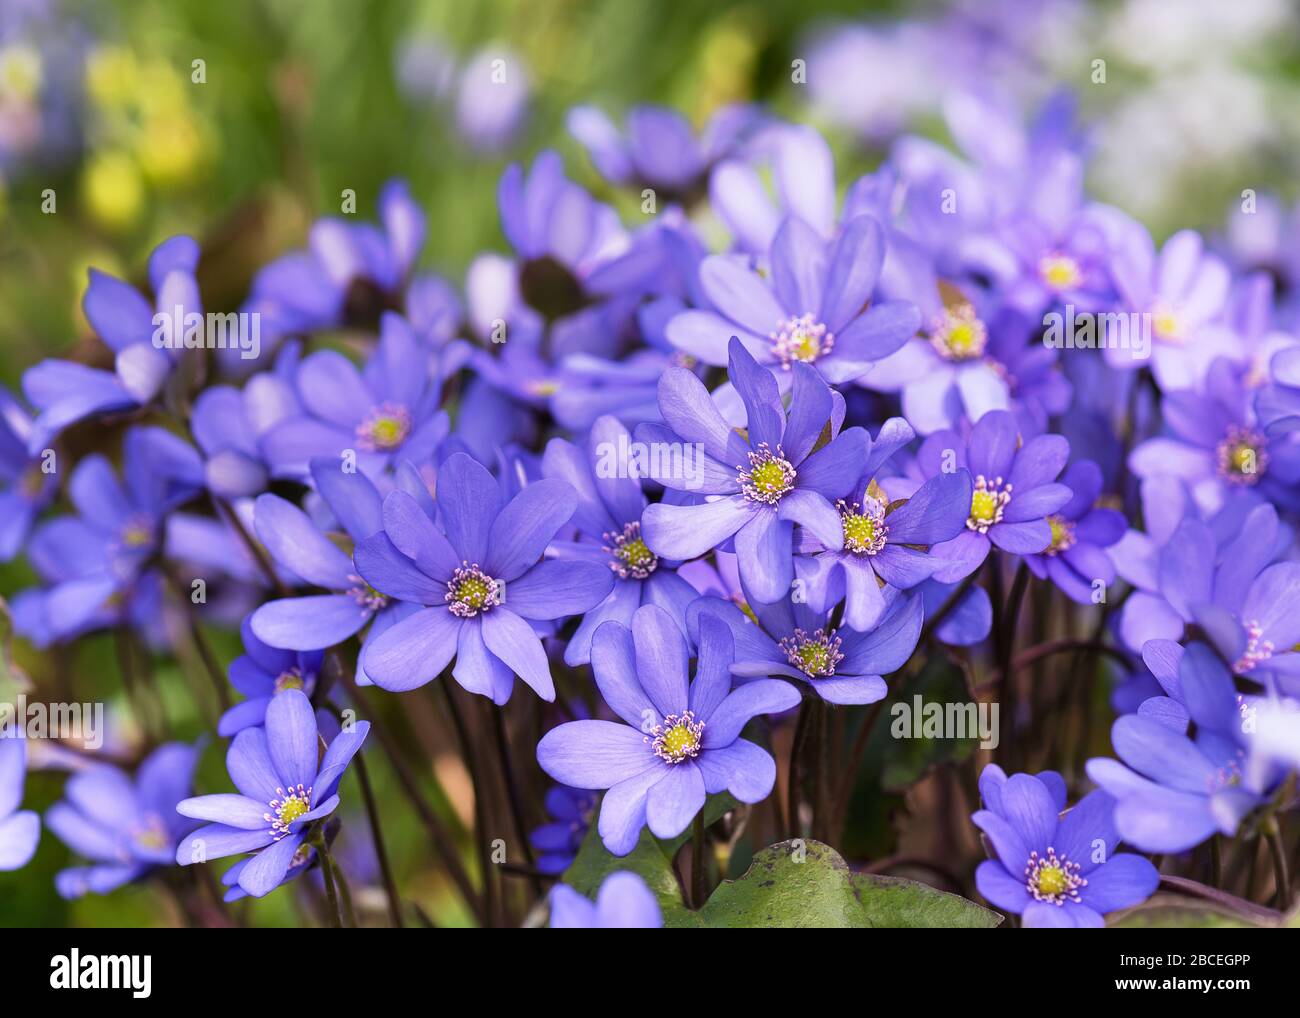 Blossoming hepatica wildflowers in early spring in the forest. Stock Photo